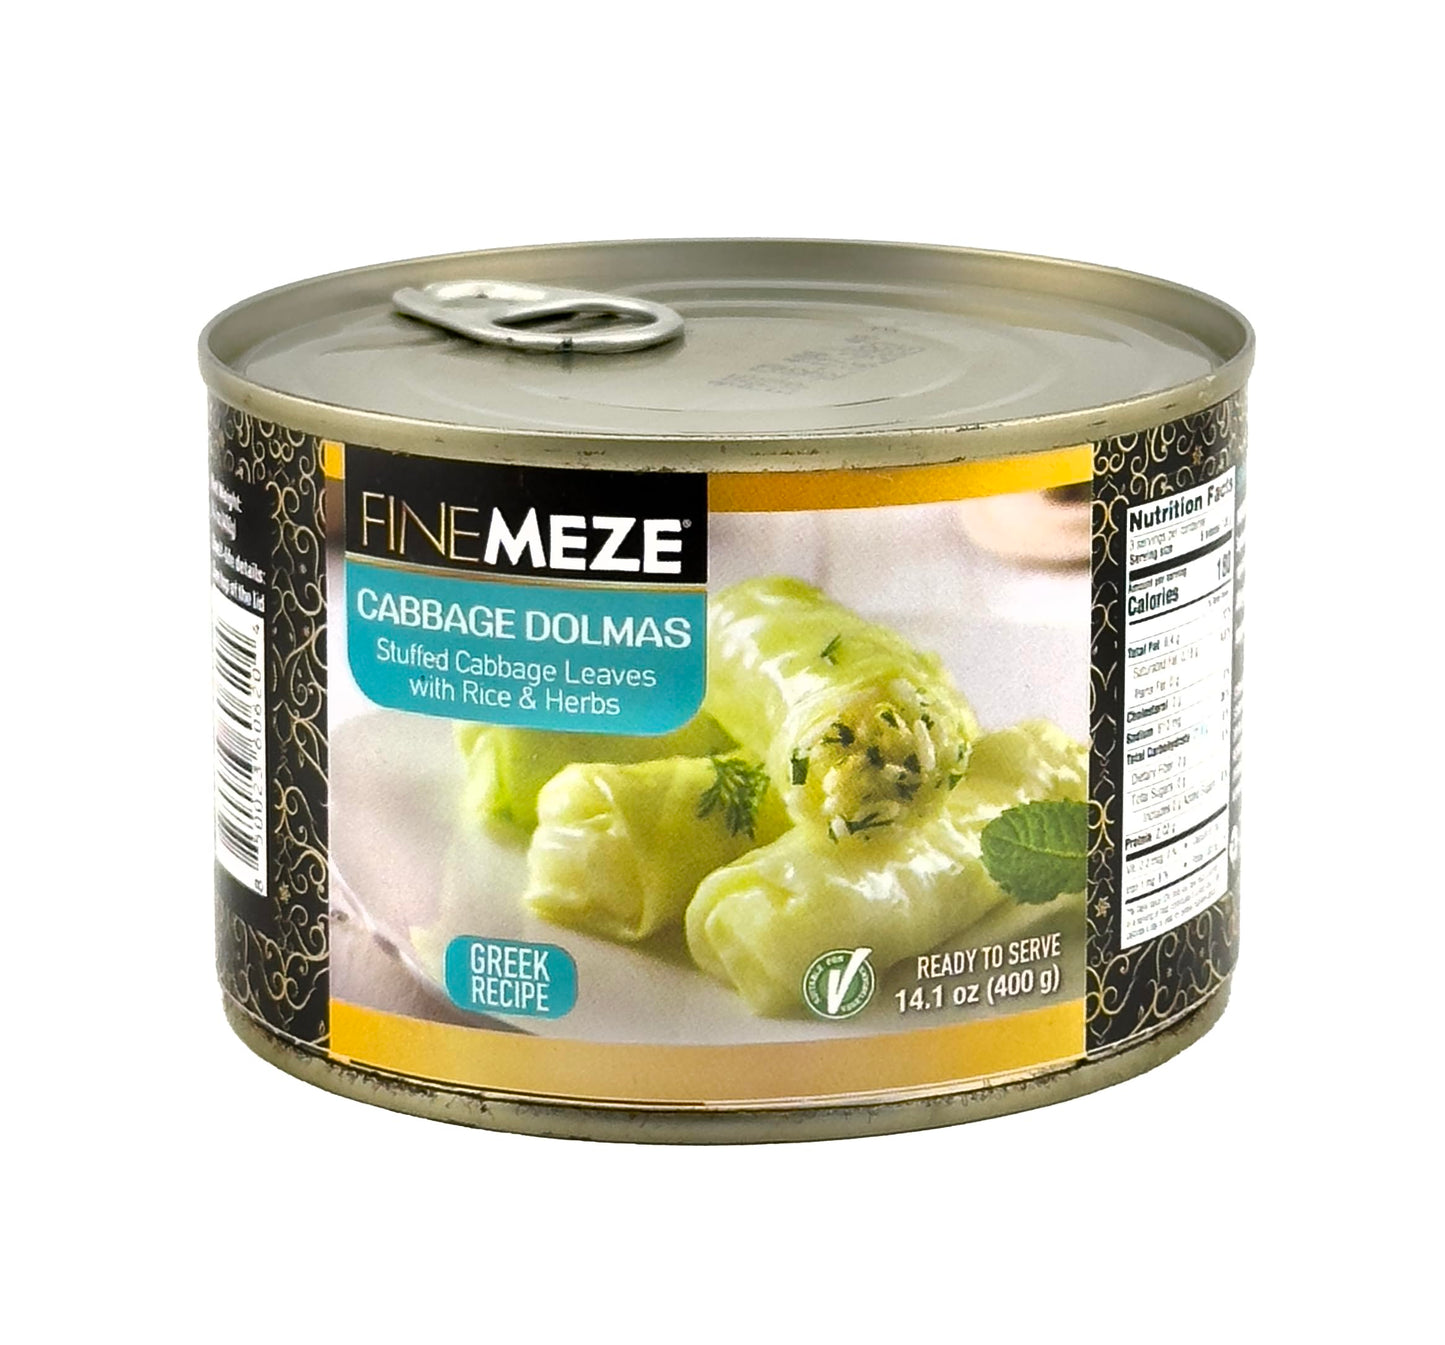 pack of Cabbage Dolmas, 400g